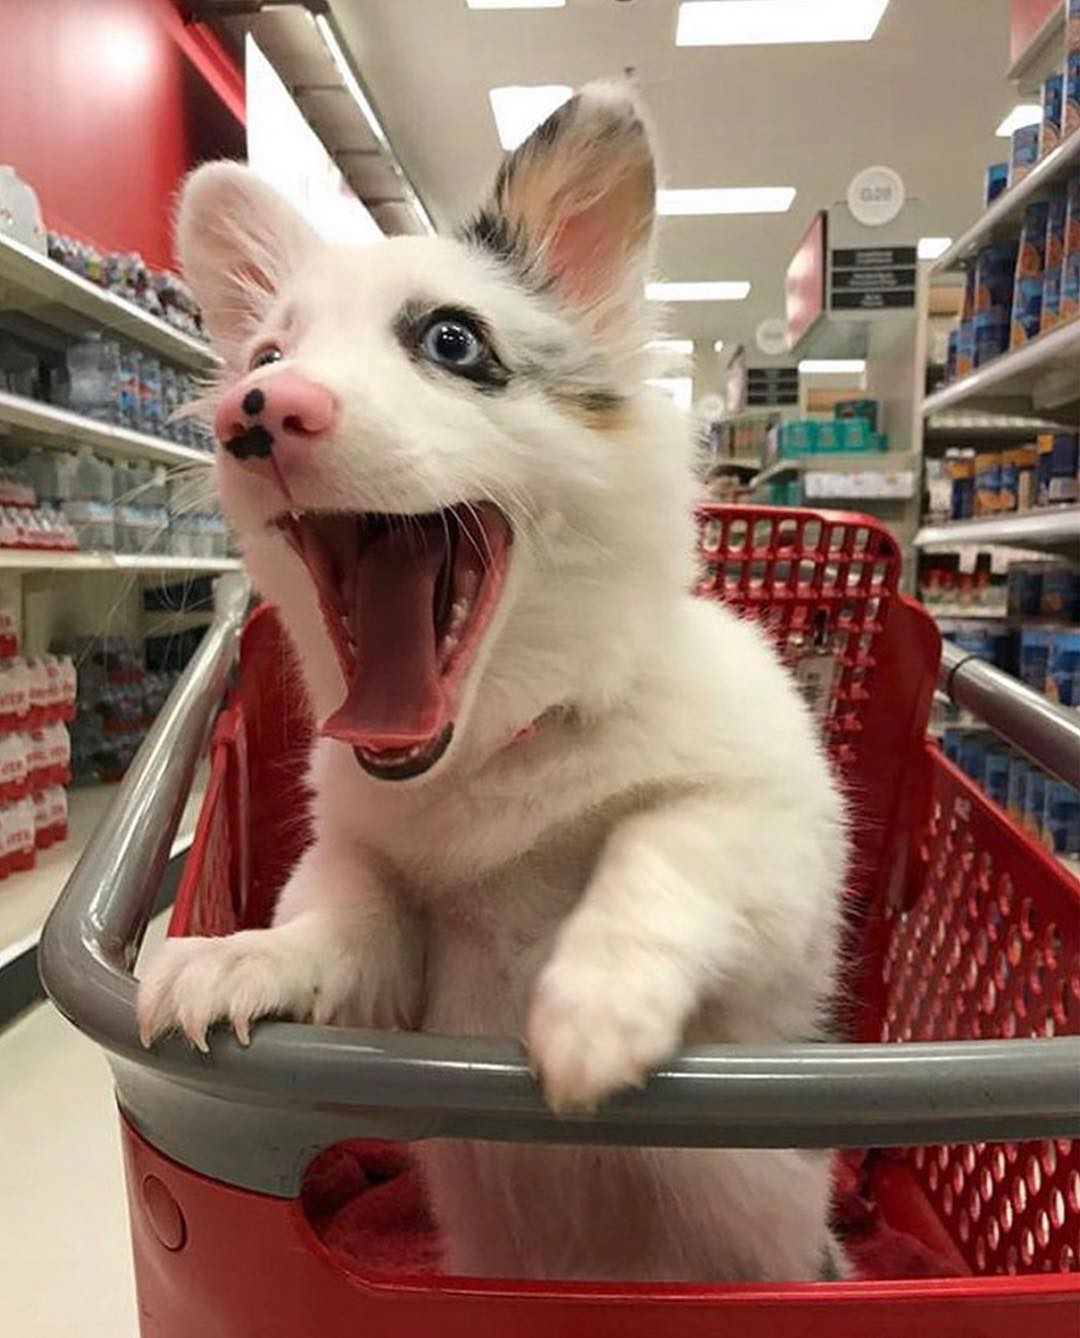 Someone is delighted about shopping!